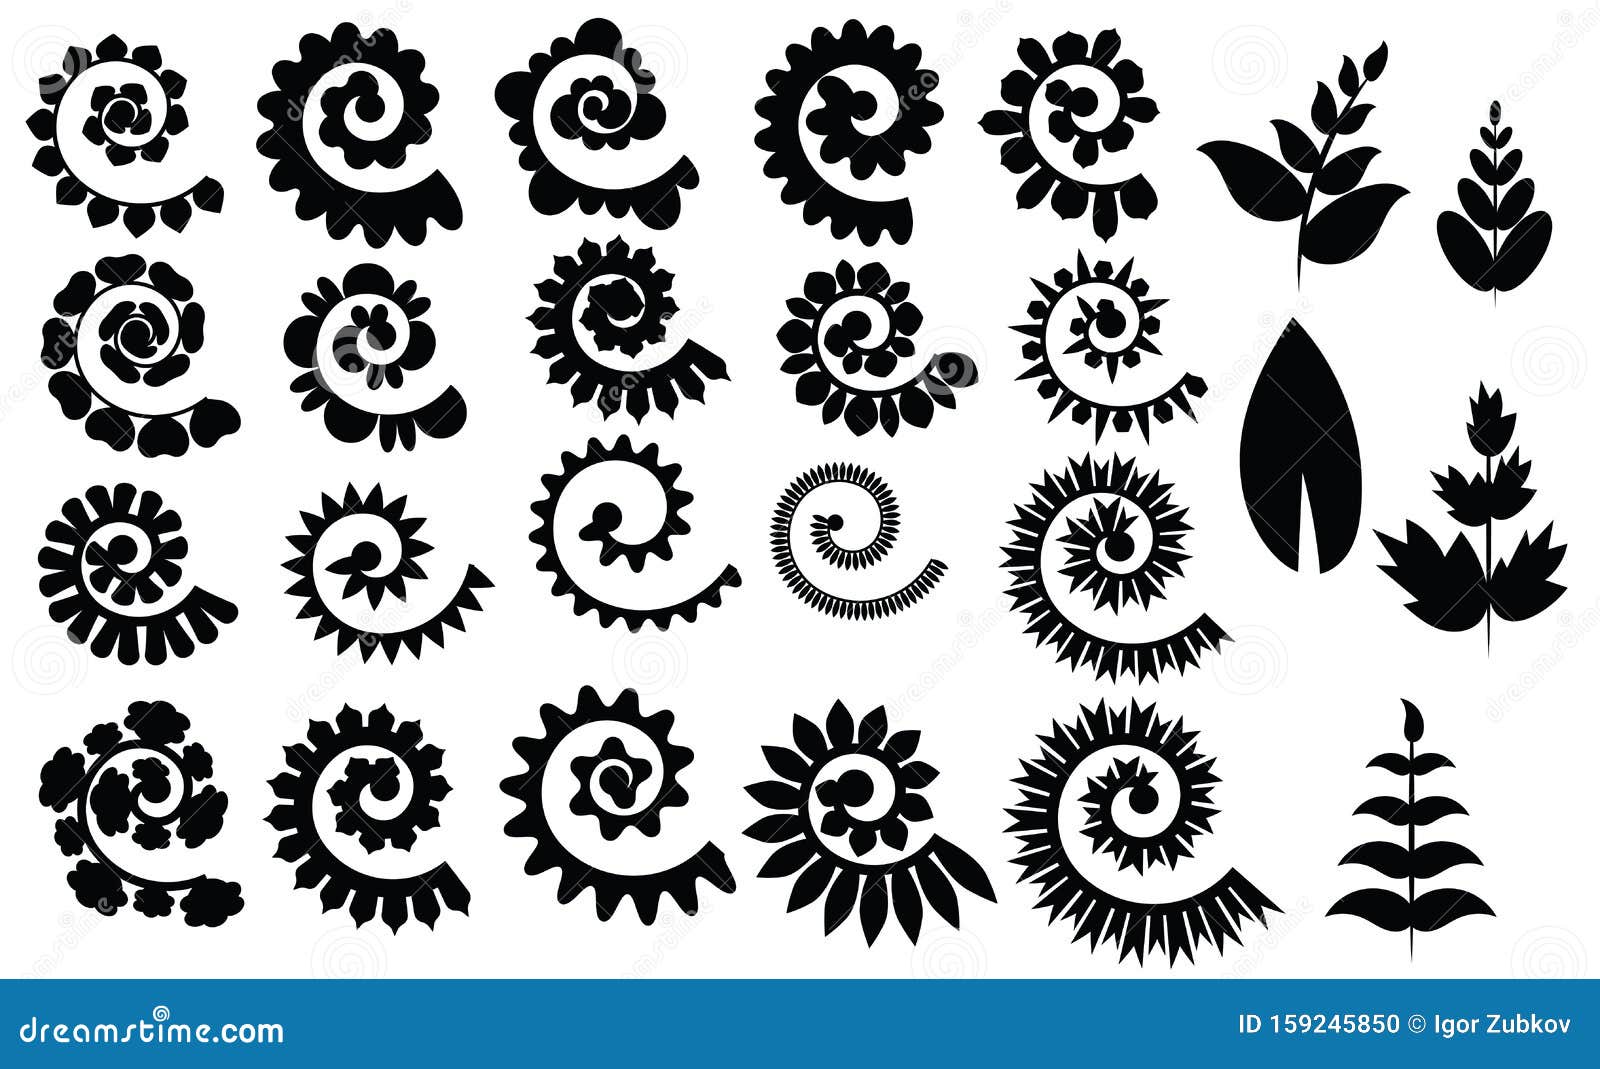 Rolled Flowers Stock Illustrations 184 Rolled Flowers Stock Illustrations Vectors Clipart Dreamstime